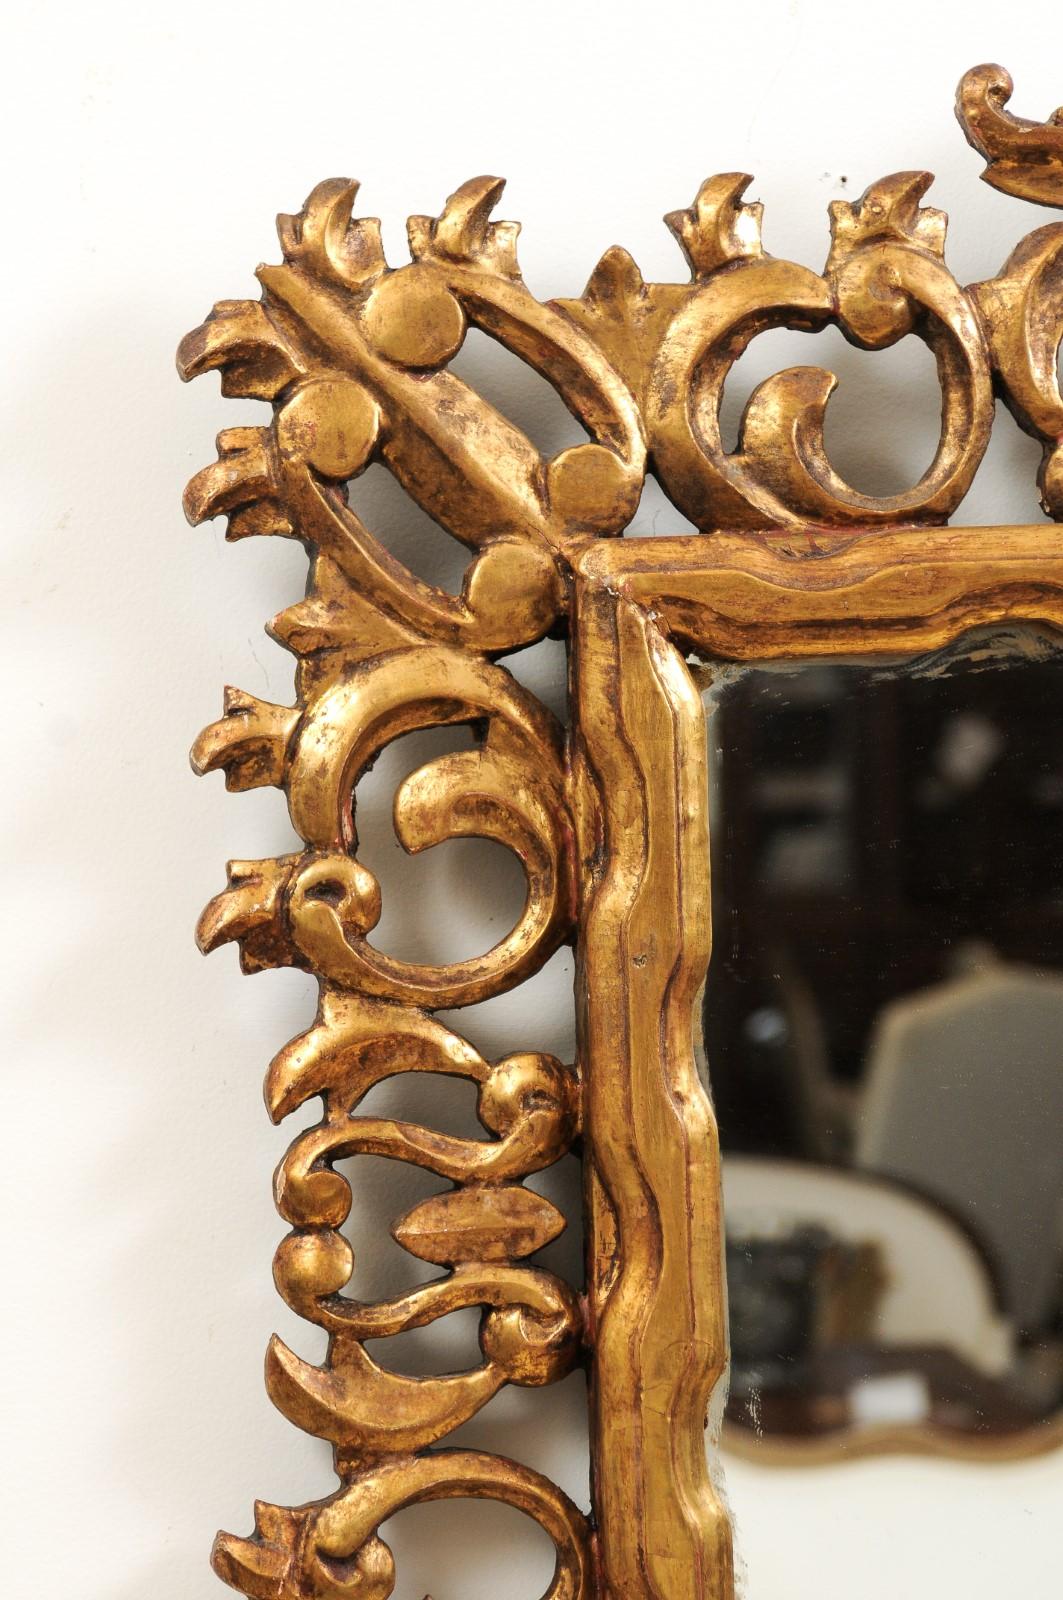 Florentine 20th Century Carved Giltwood Mirror with C-Scrolls and Foliage Motifs 3